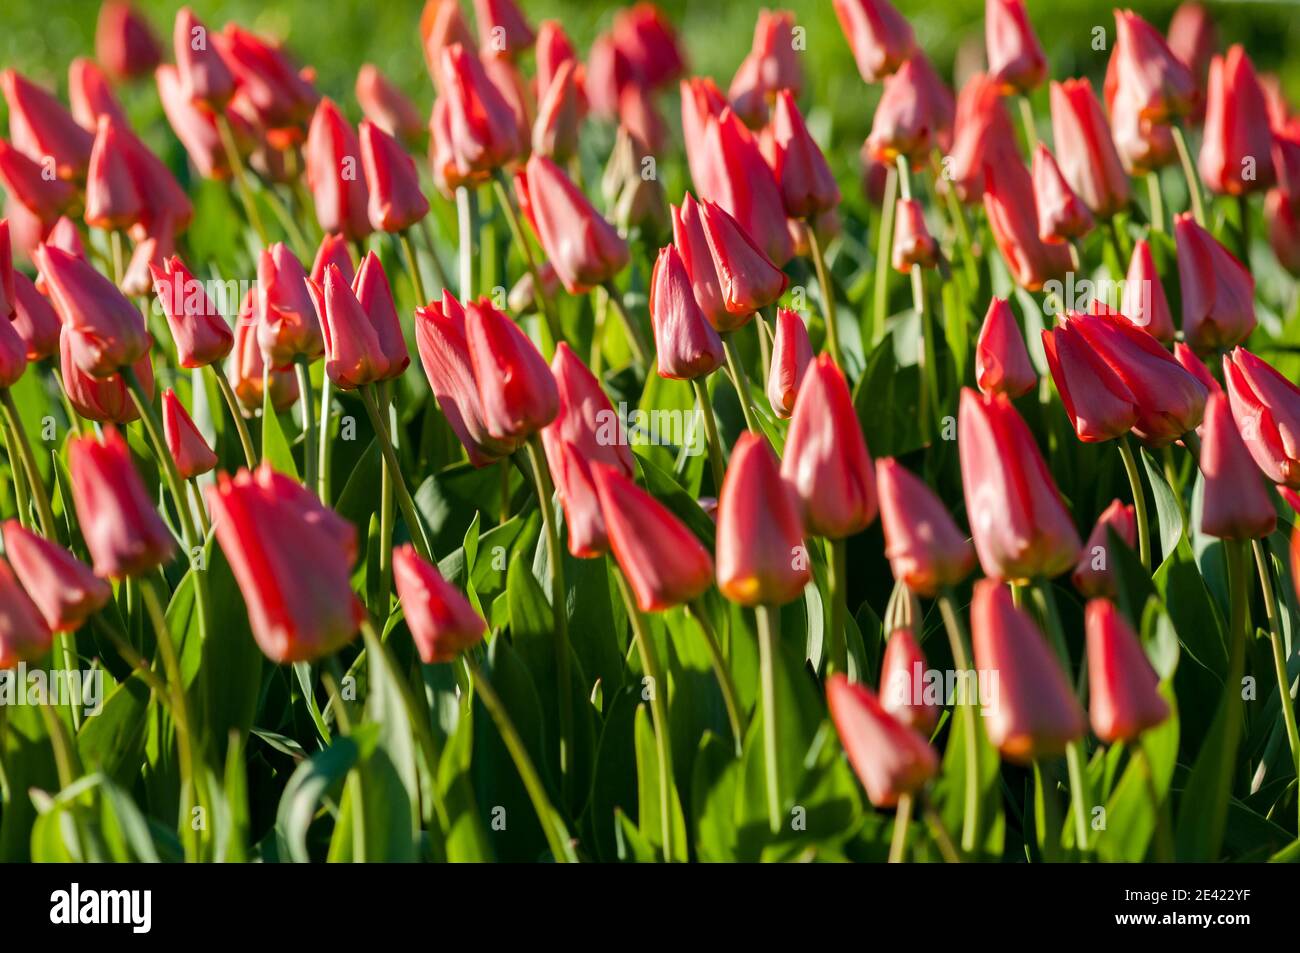 Group of red tulips in the garden, close-up shot Stock Photo